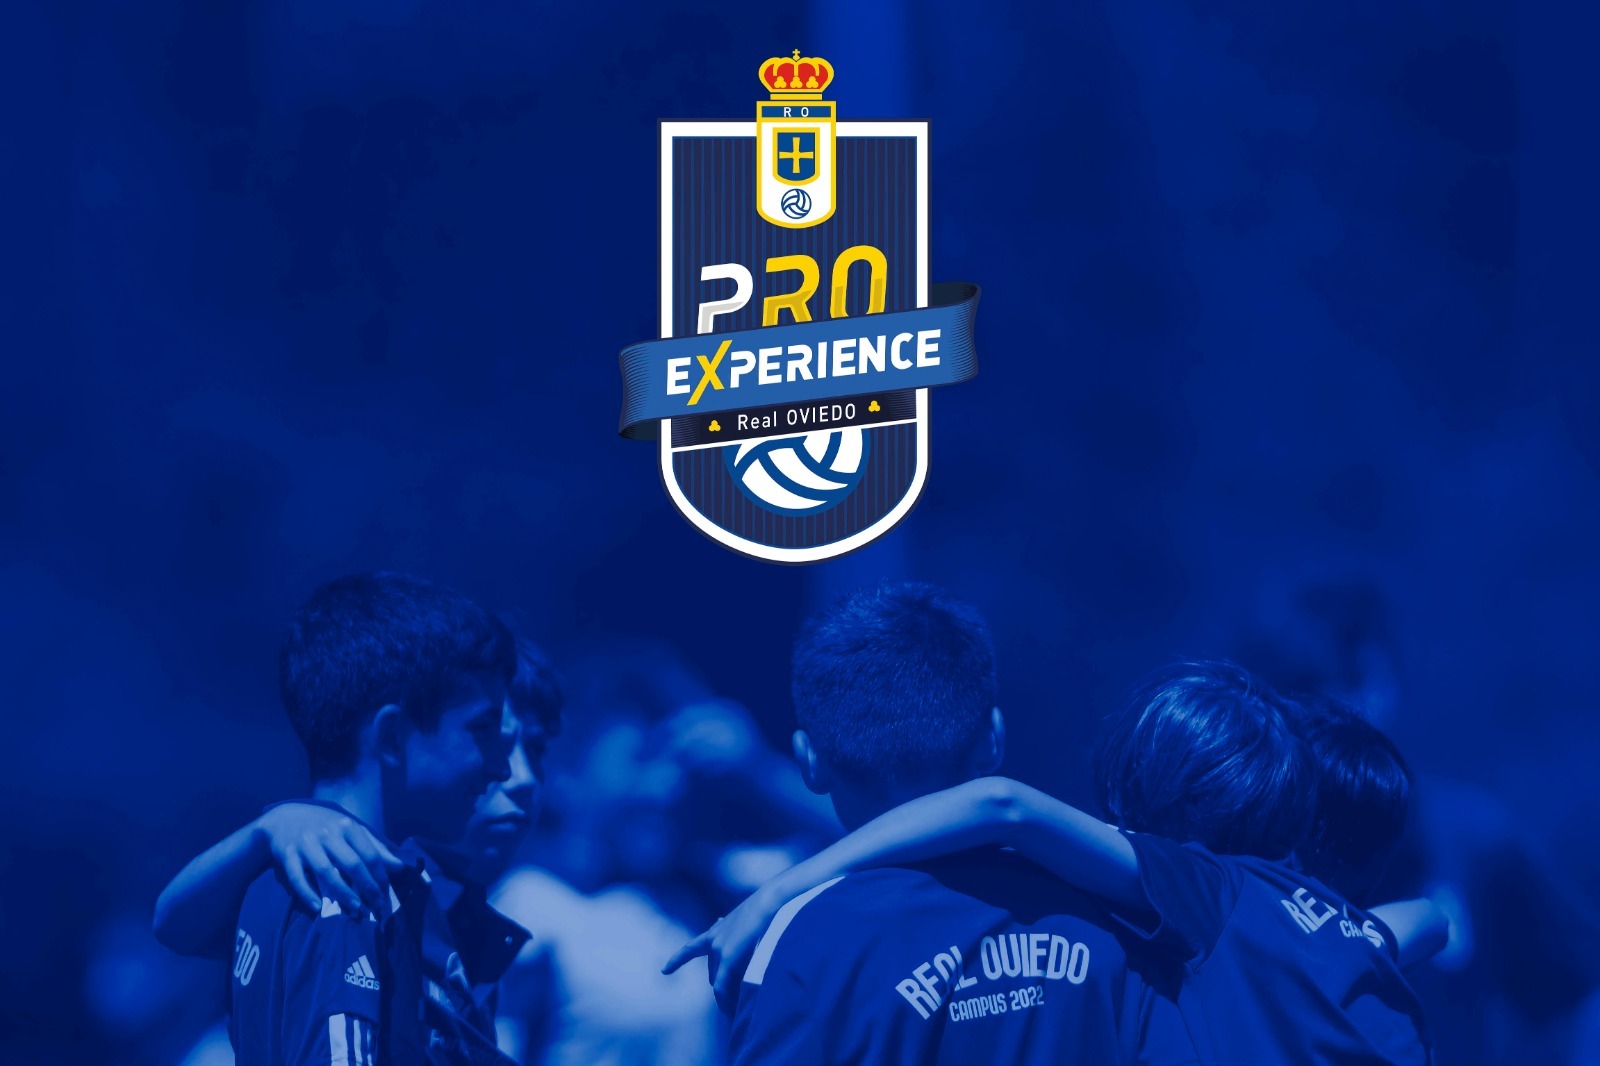 The Real Oviedo Pro Experience is Born, Real Oviedo